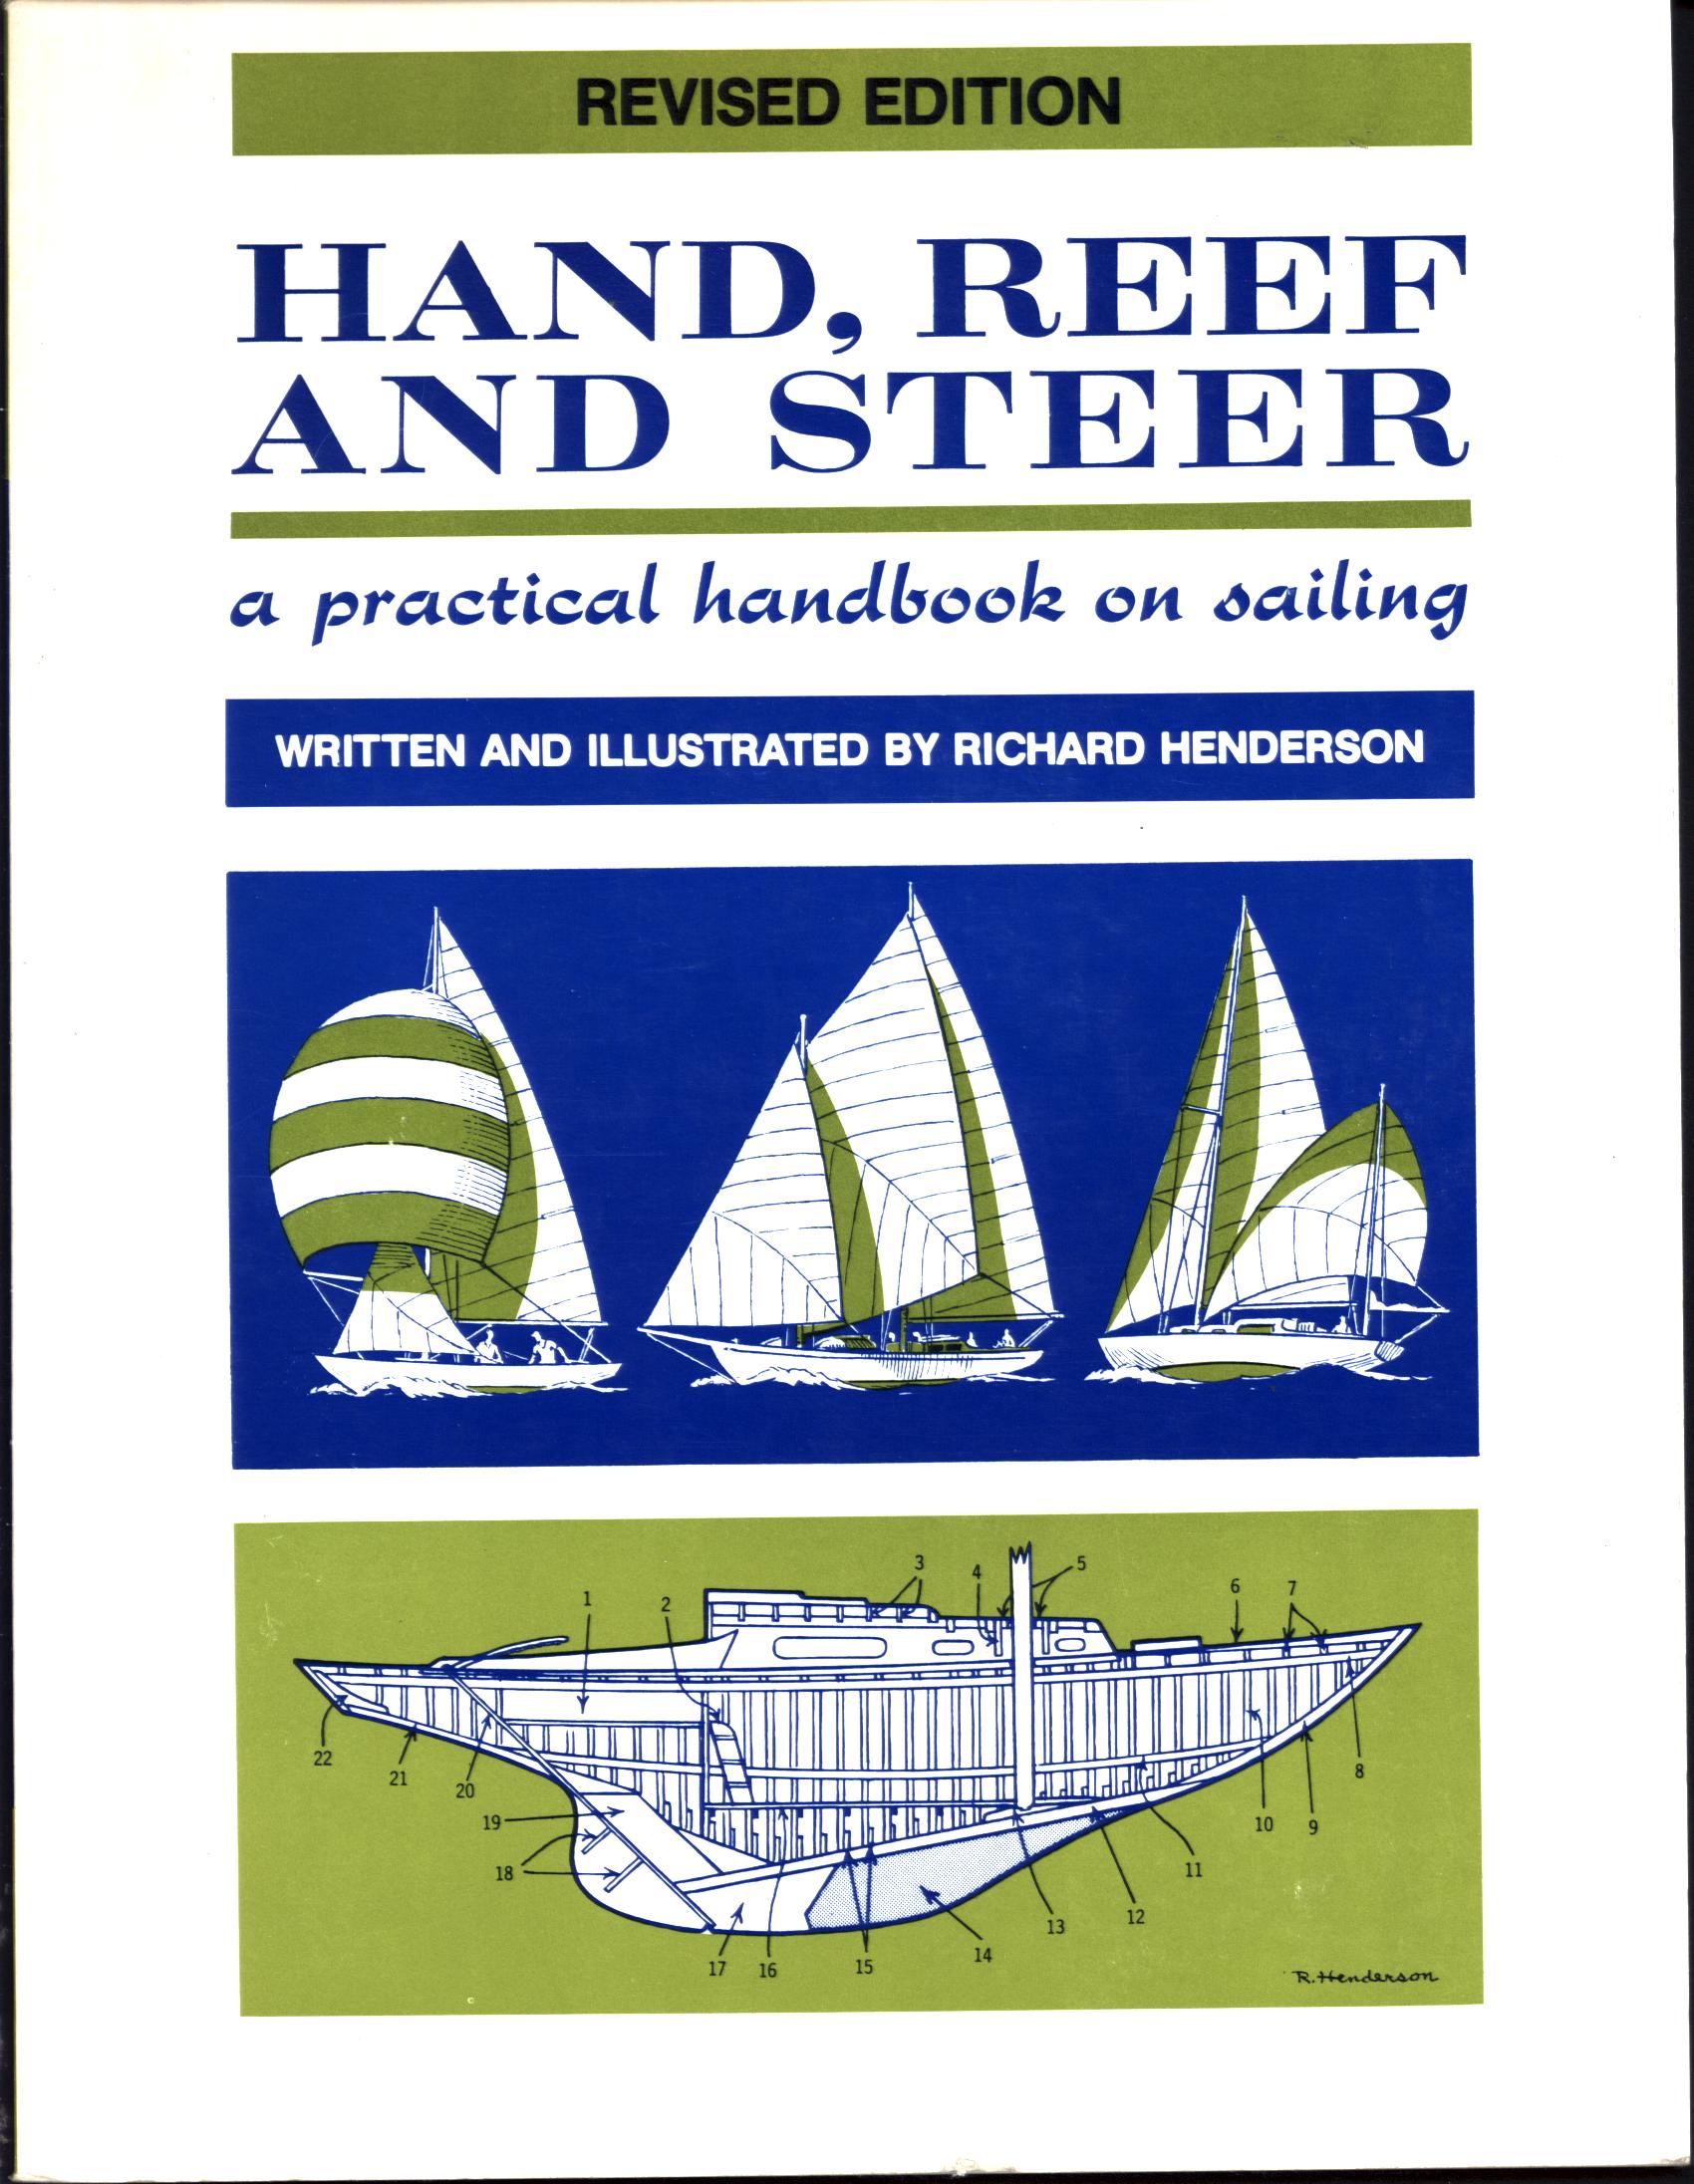 HAND, REEF, AND STEER: a practical handbook on sailing.